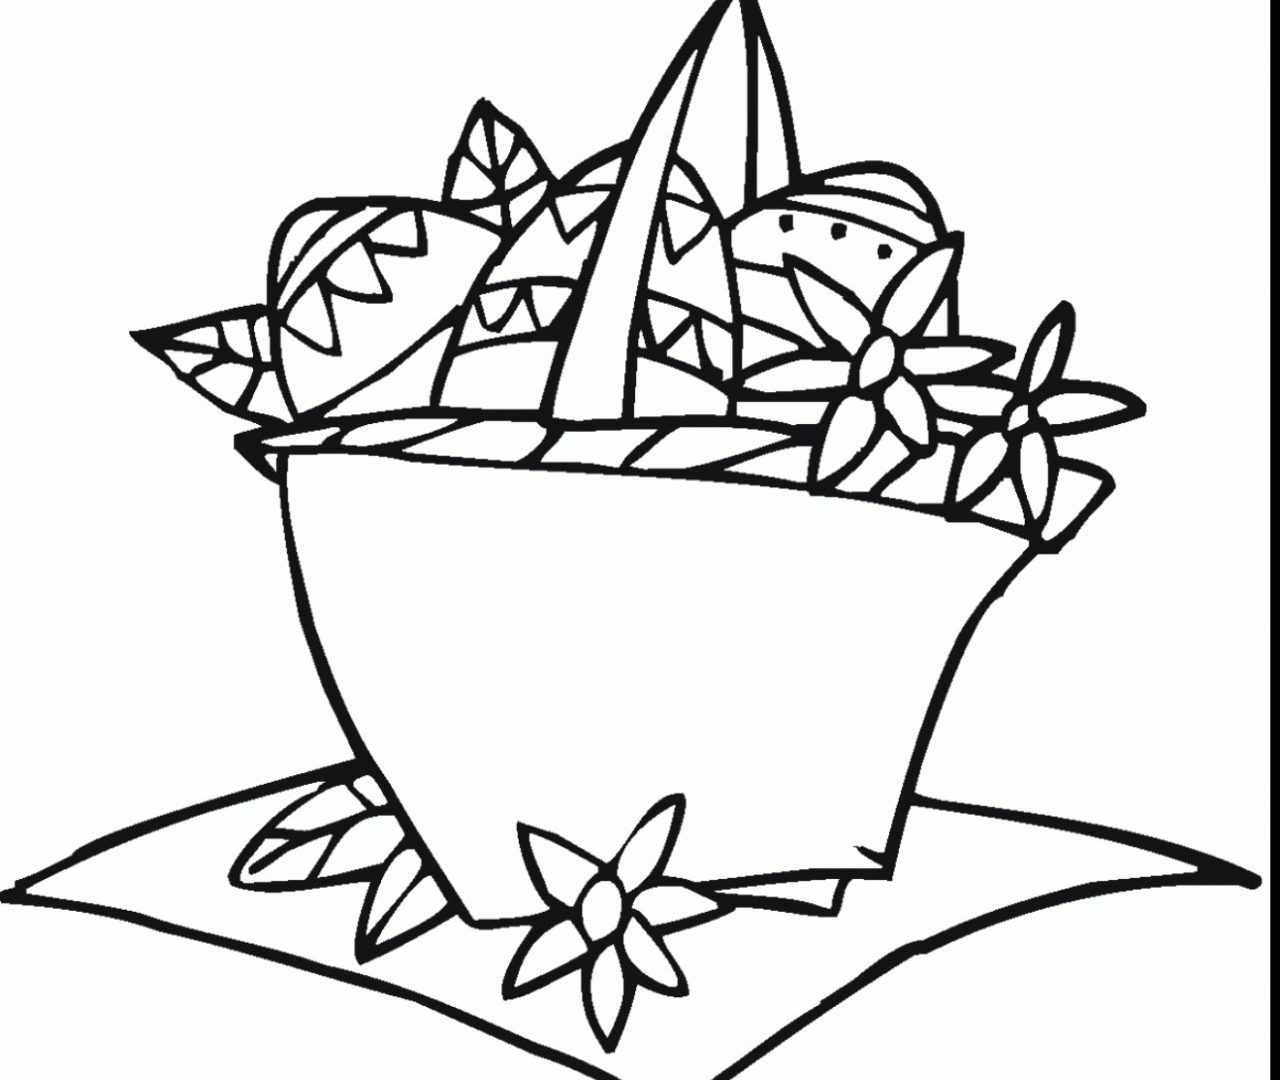 make-your-own-coloring-pages-at-getcolorings-free-printable-colorings-pages-to-print-and-color